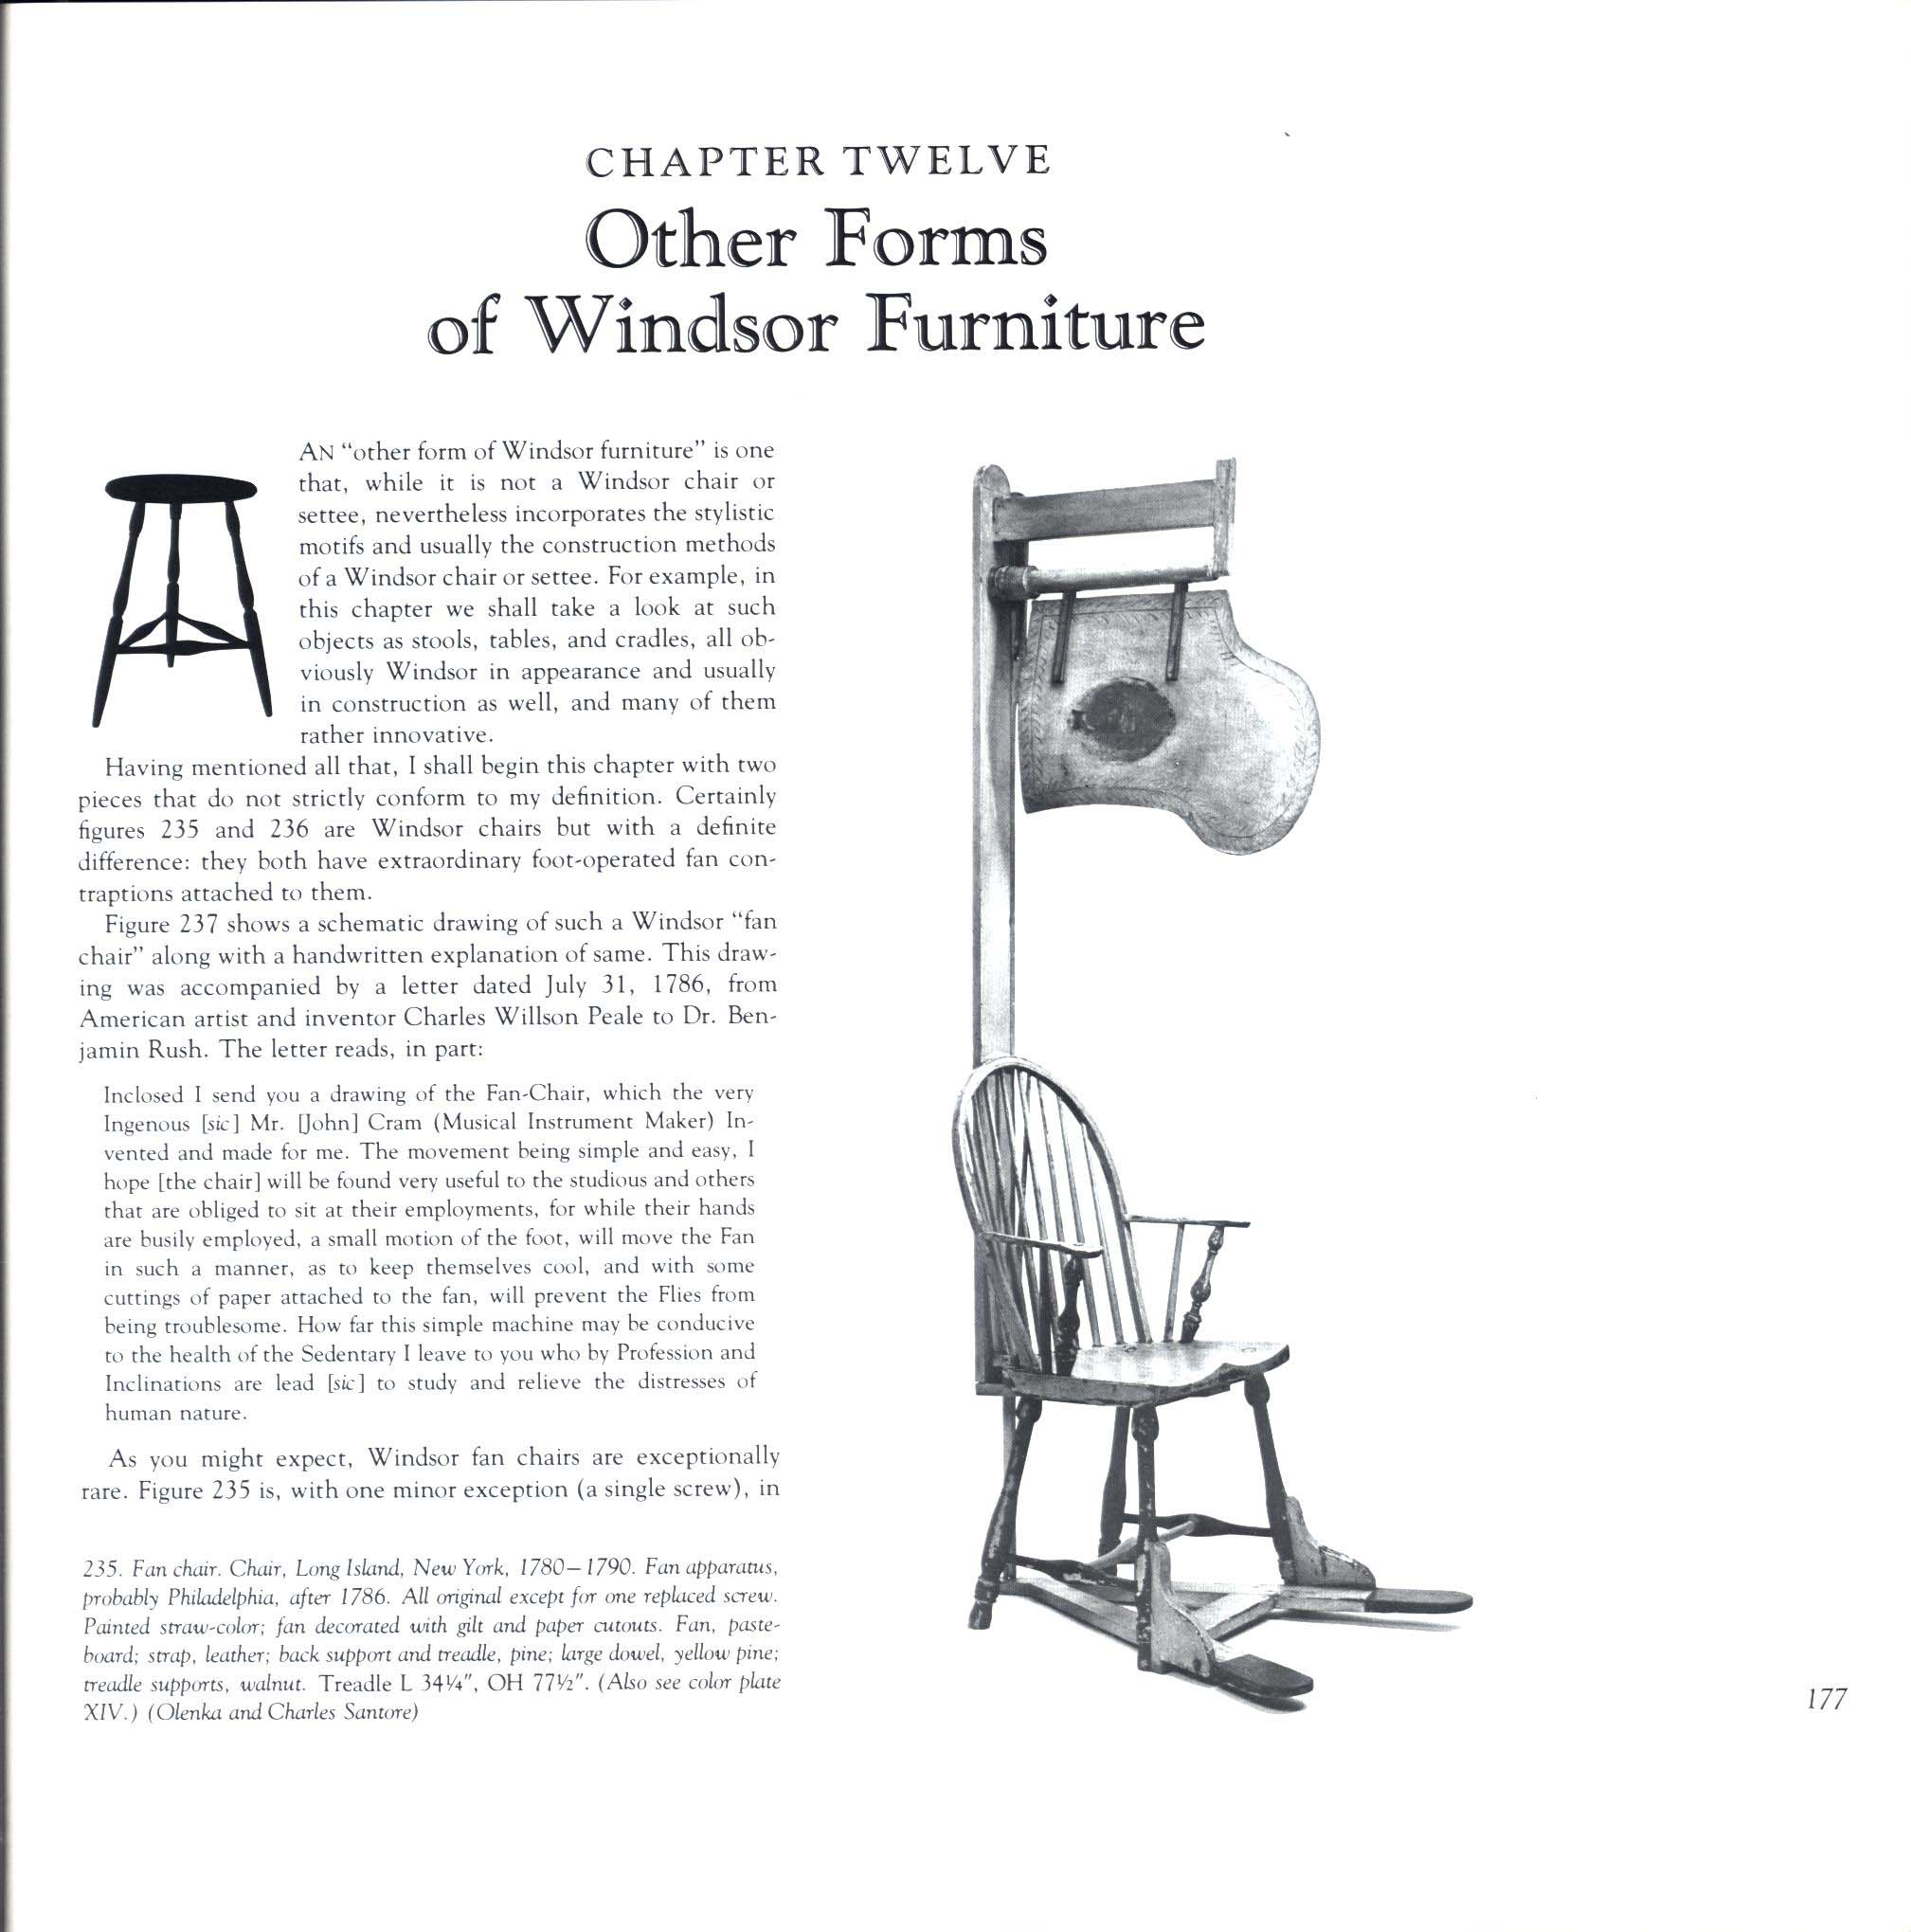 THE WINDSOR STYLE IN AMERICA: a pictorial study of the history and regional characteristics of the most popular furniture form of eighteenth-century America, 1730-1830. runn3241m